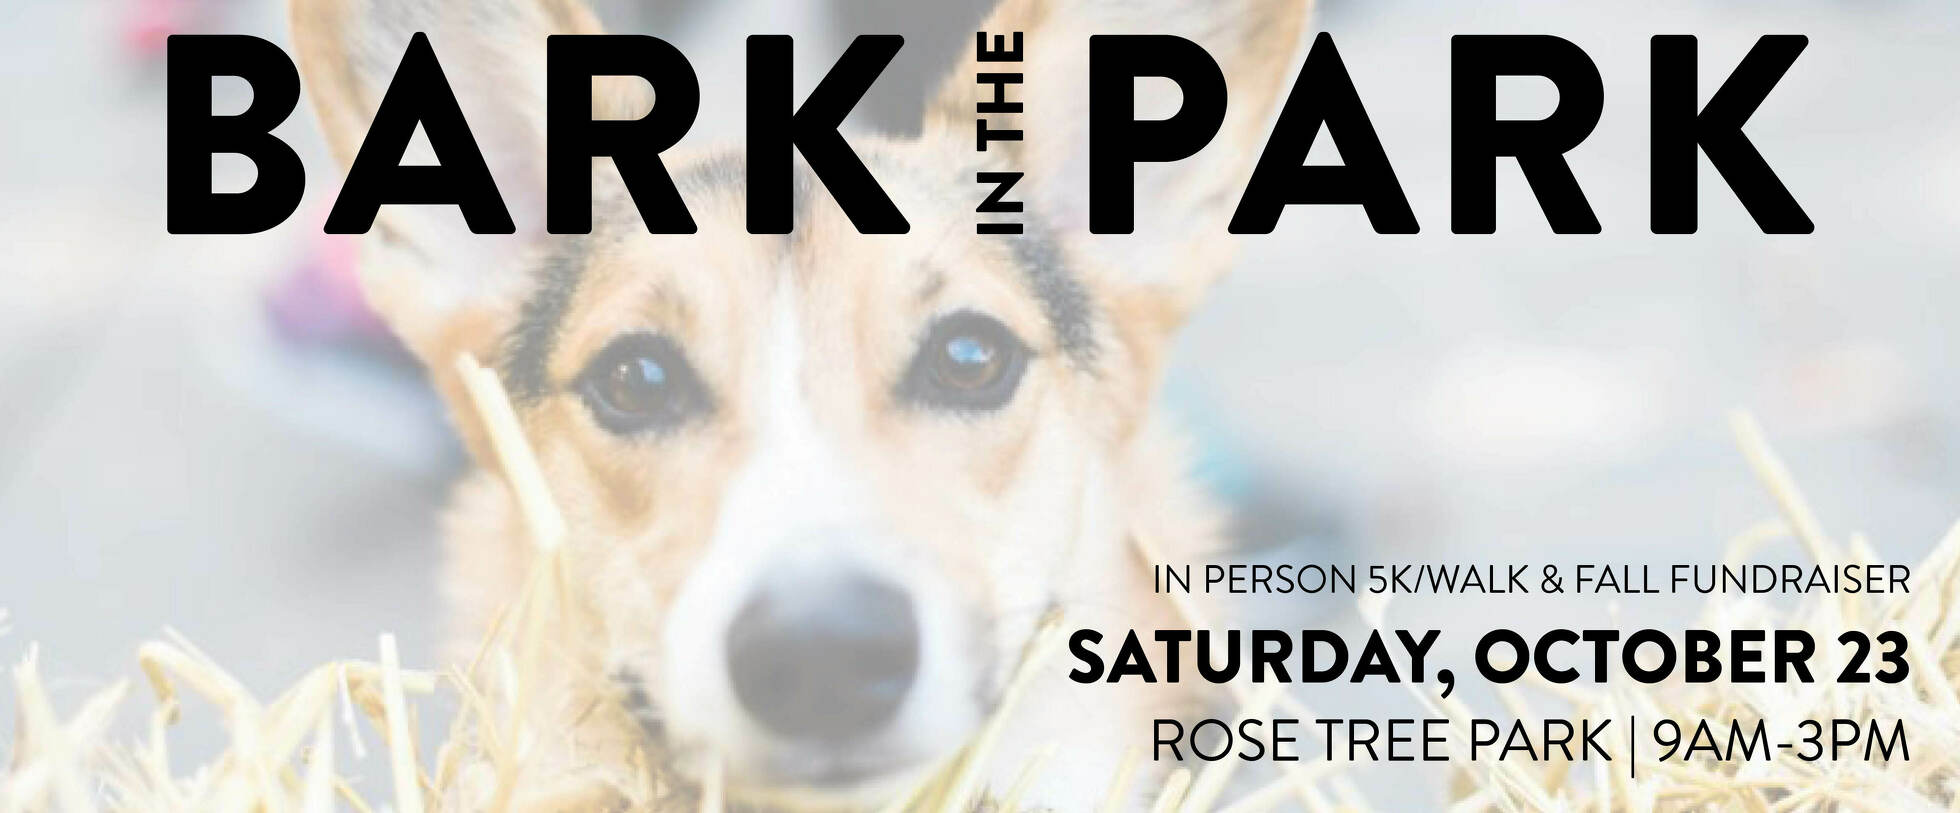 Bark in the Park 5K and Fall Fundraiser 